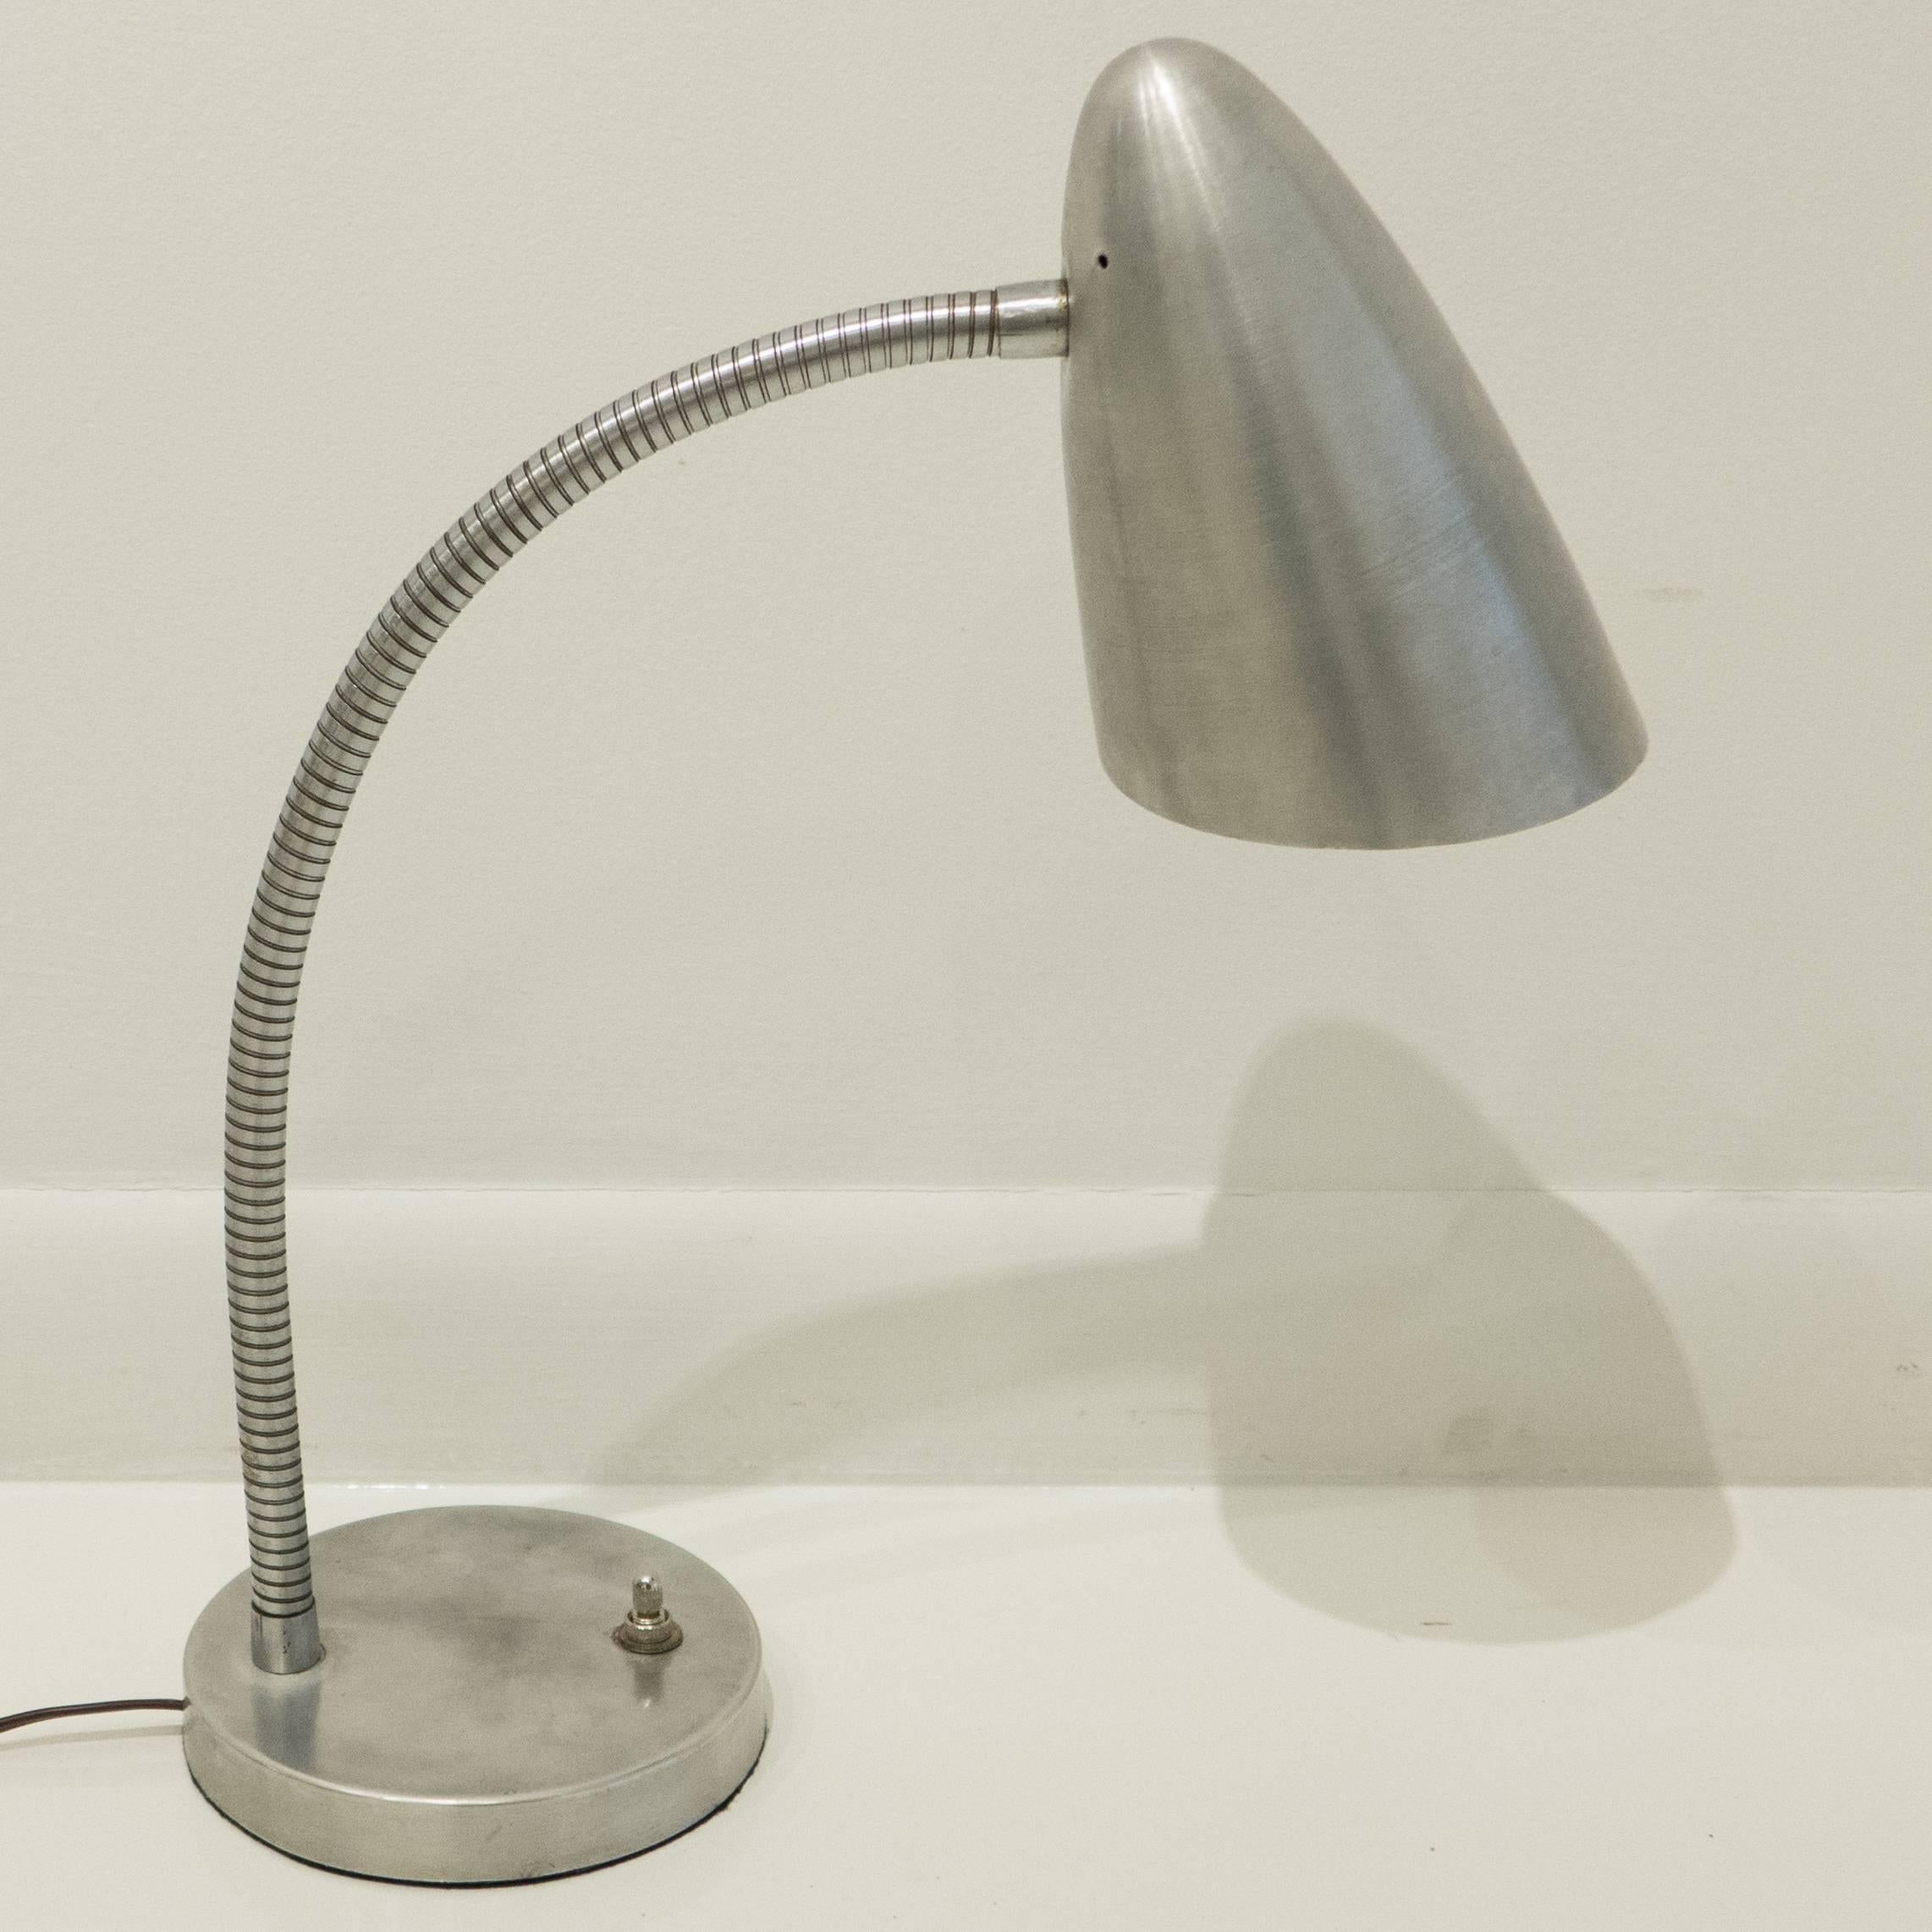 Flexible gooseneck table lamp with a spun aluminum reflector, satin chrome gooseneck, and cast aluminum base, designed by Harry Handler for General Lighting Co, produced circa 1947. An early postwar modernist lighting design that made its way into